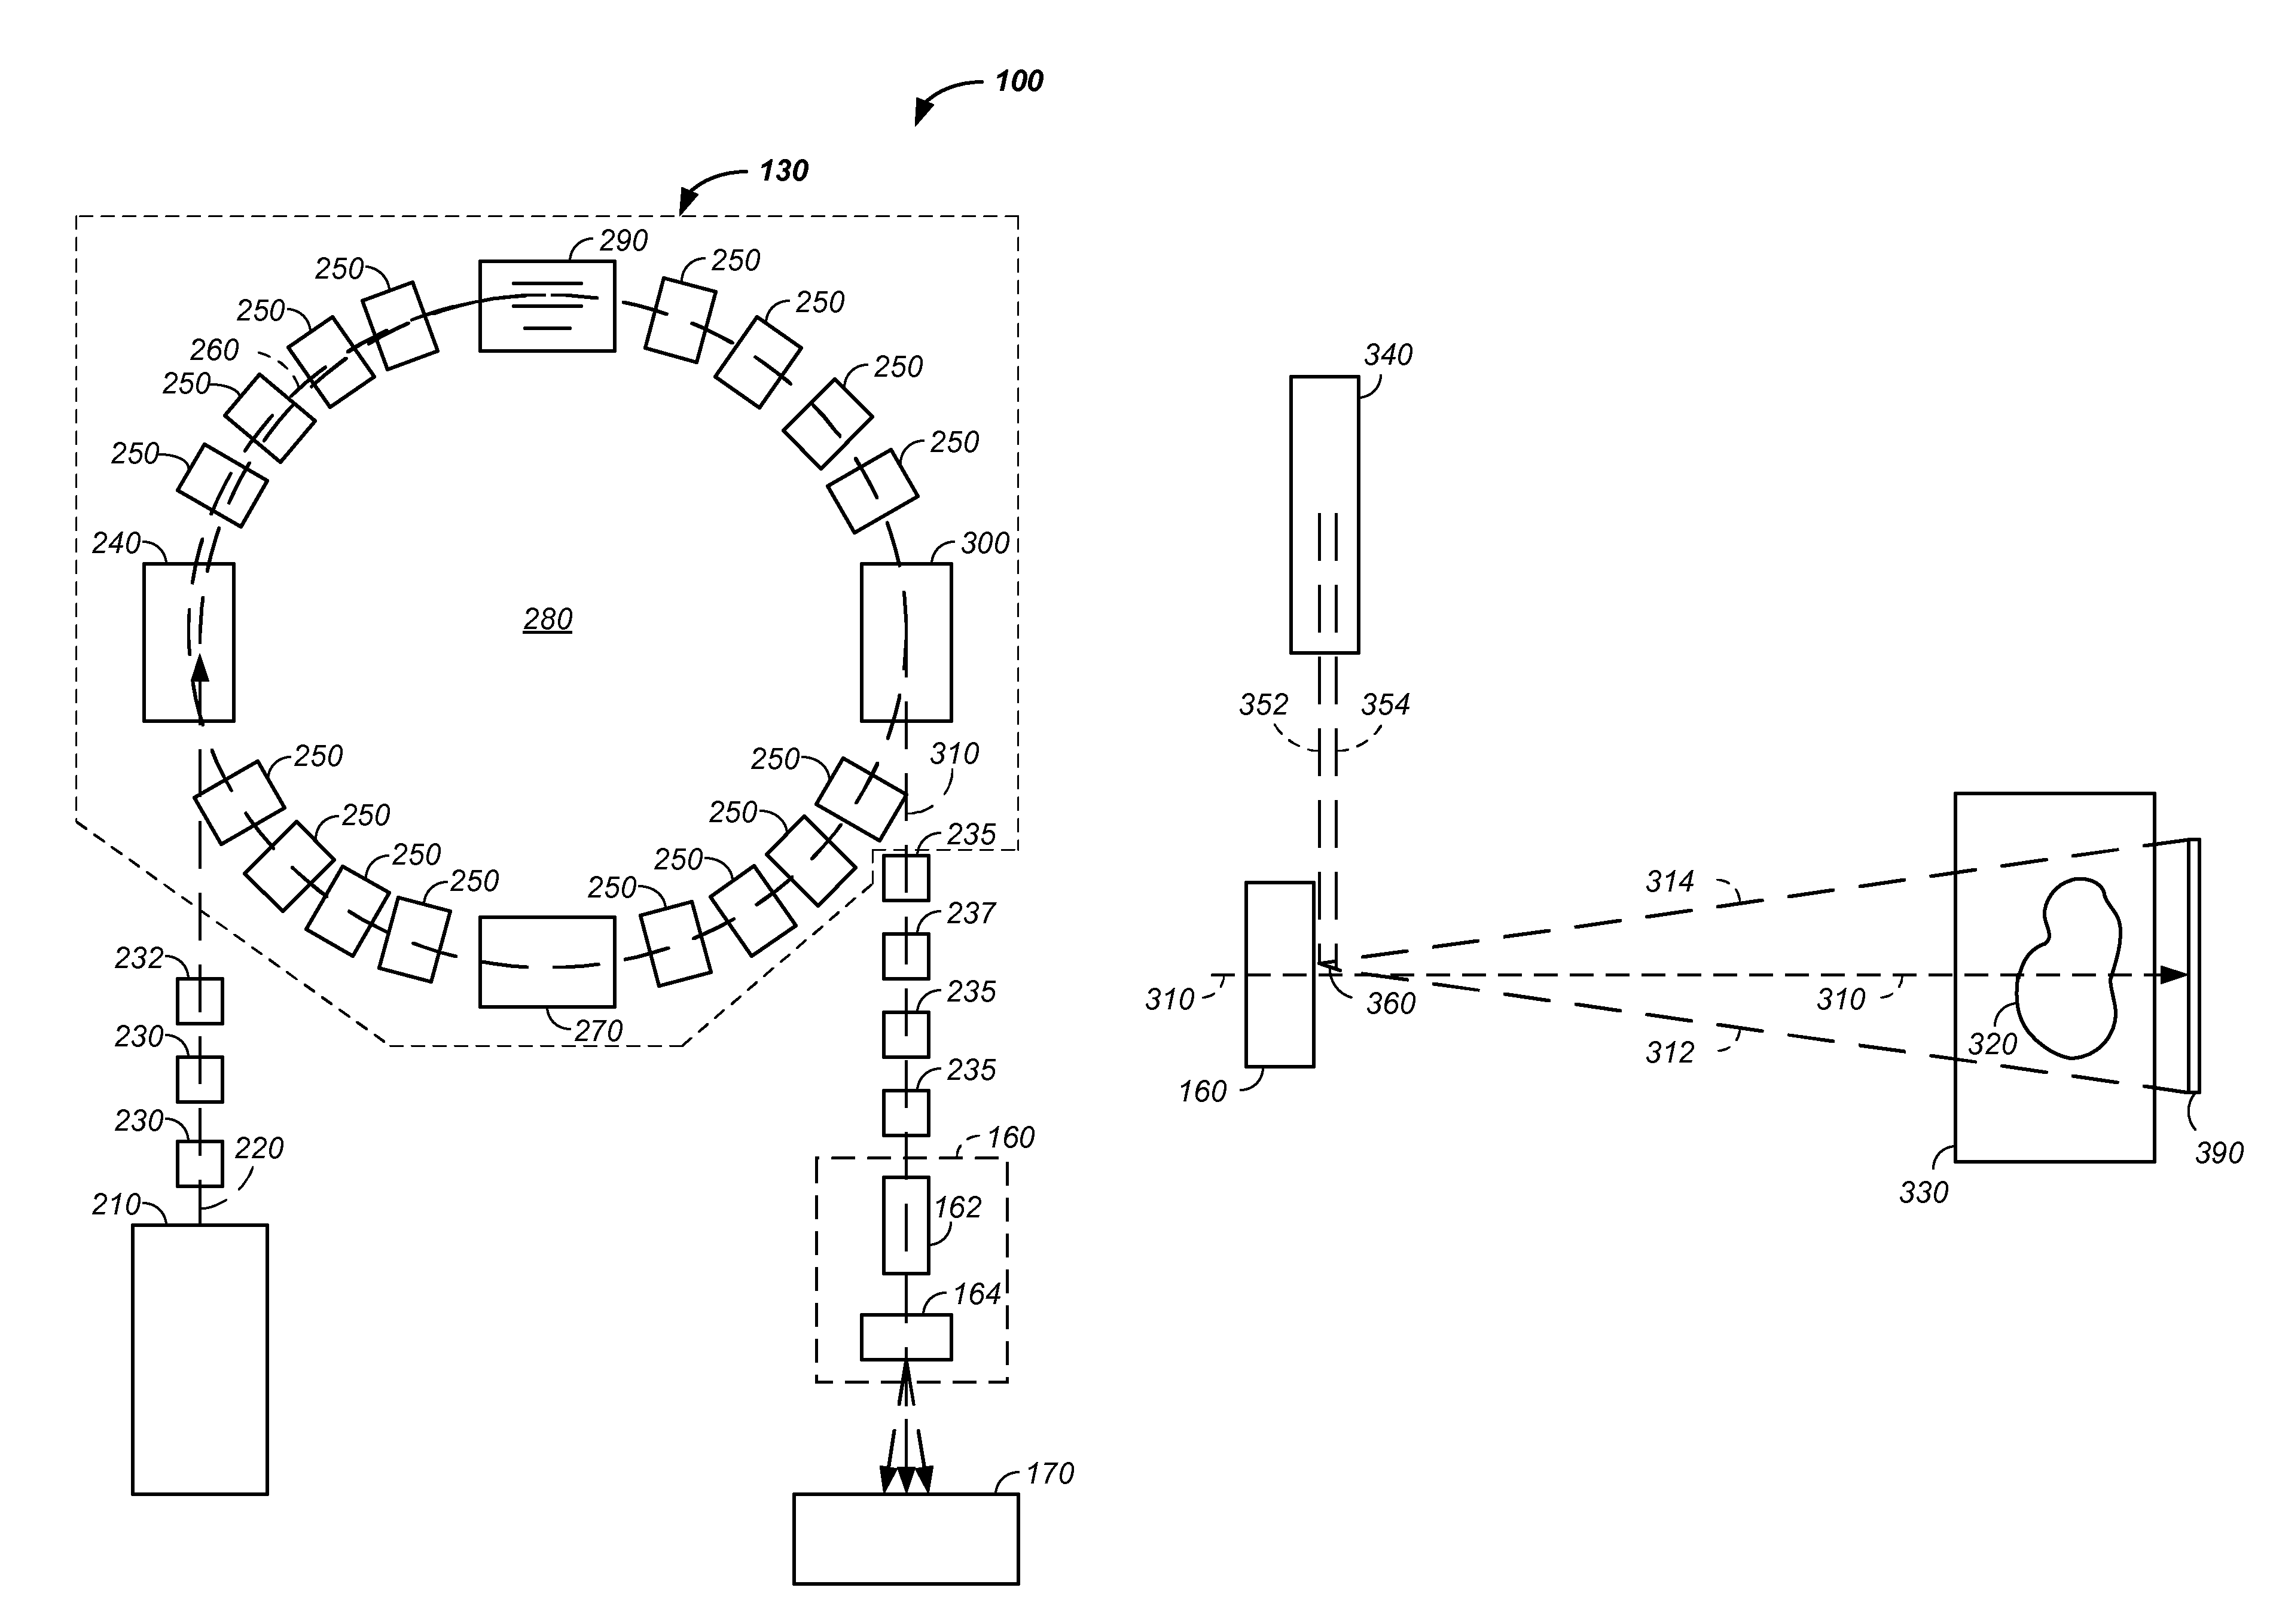 Charged particle cancer therapy X-ray method and apparatus